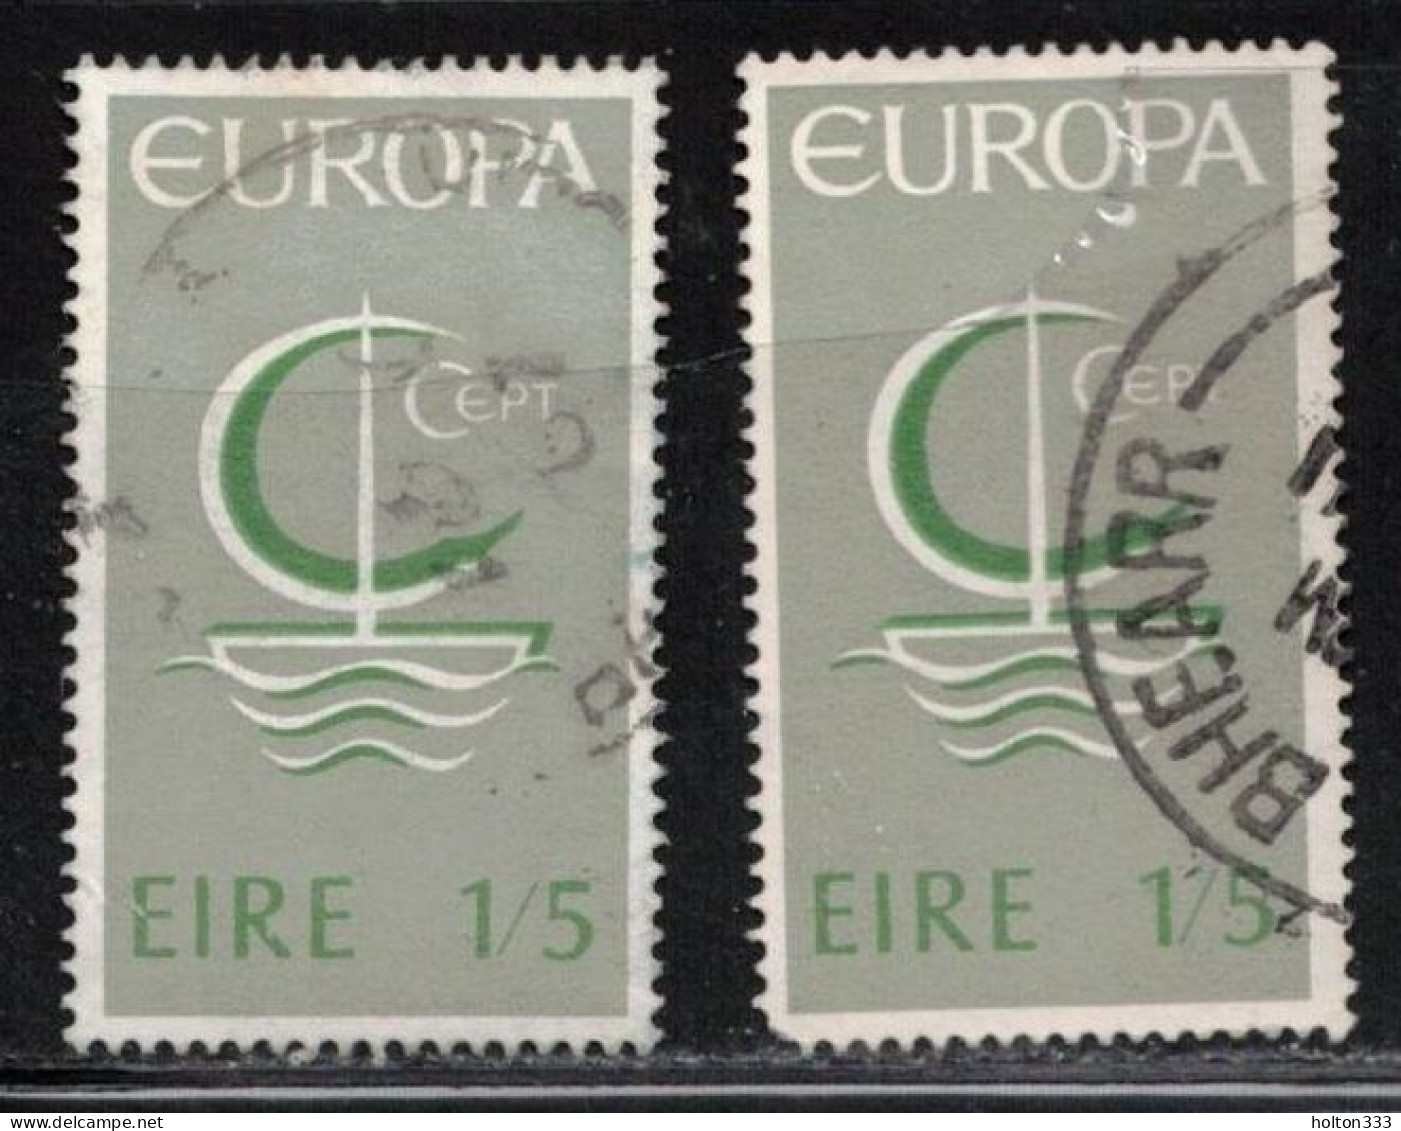 IRELAND Scott # 217 Used X 2 - 1966 Europa Issue B - Used Stamps